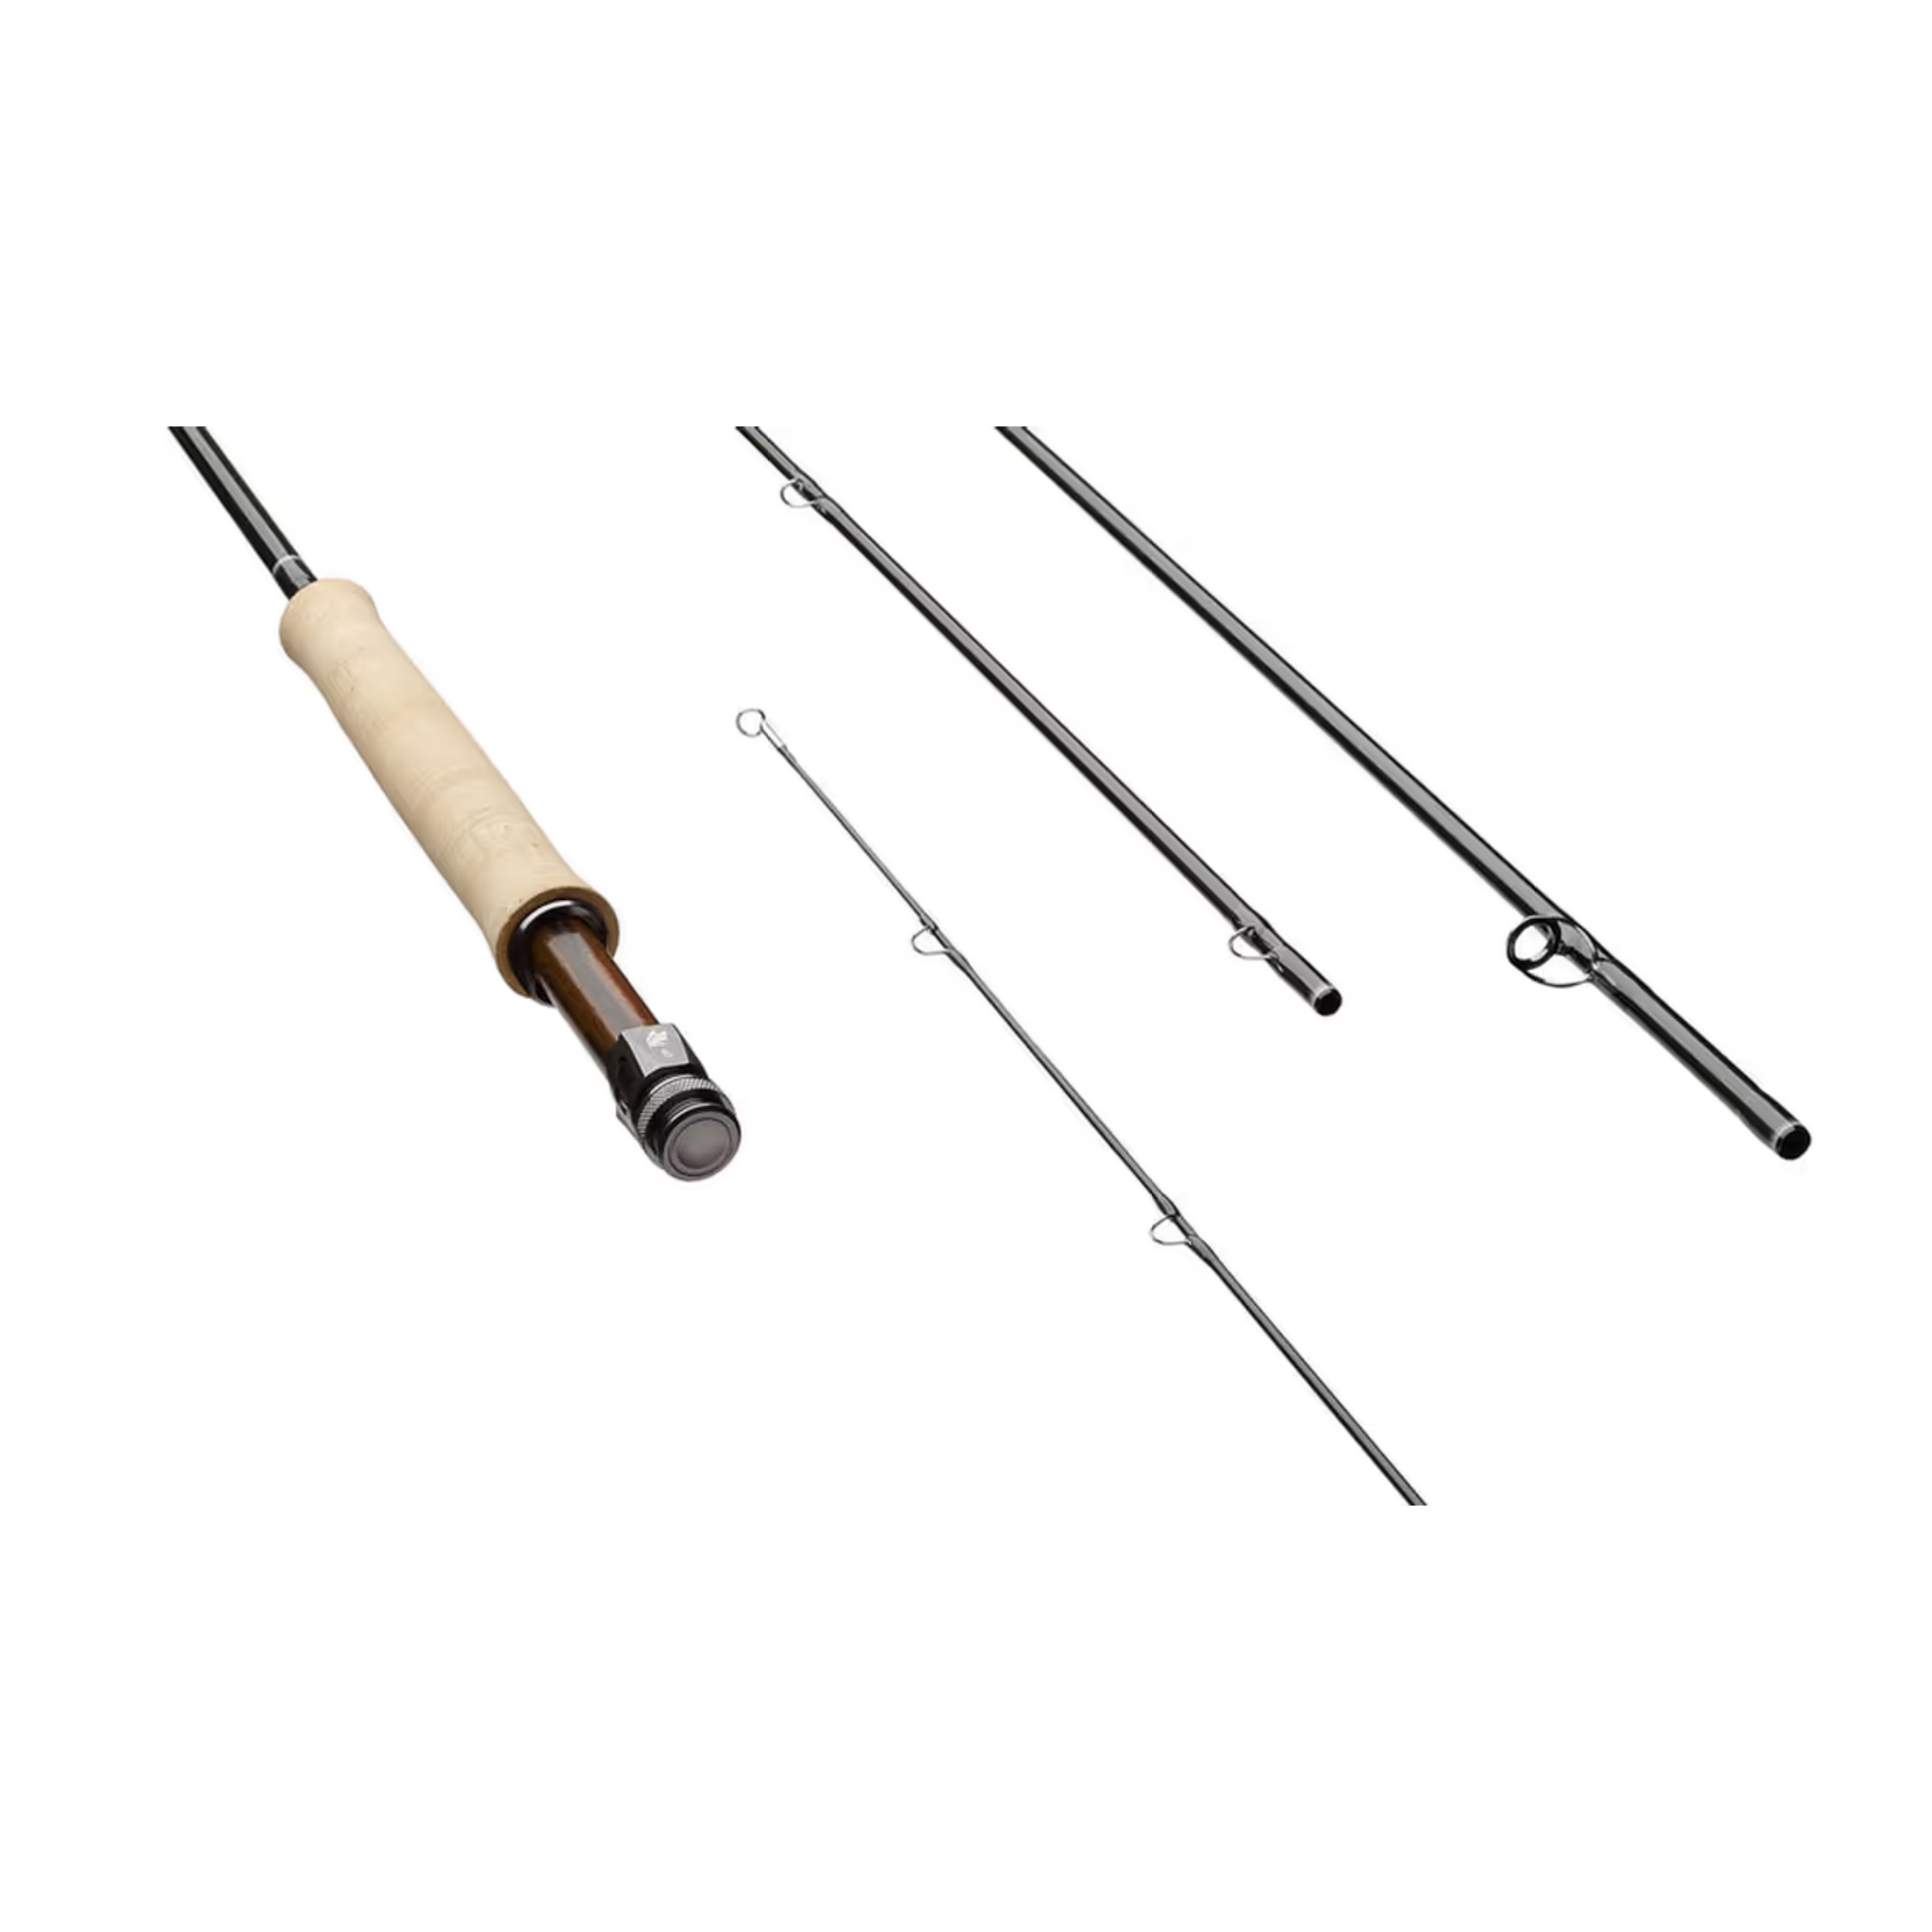  Fishing Rod Cases & Tubes - Sage / Fishing Rod Cases & Tubes / Fishing  Rods & Ac: Sports & Outdoors